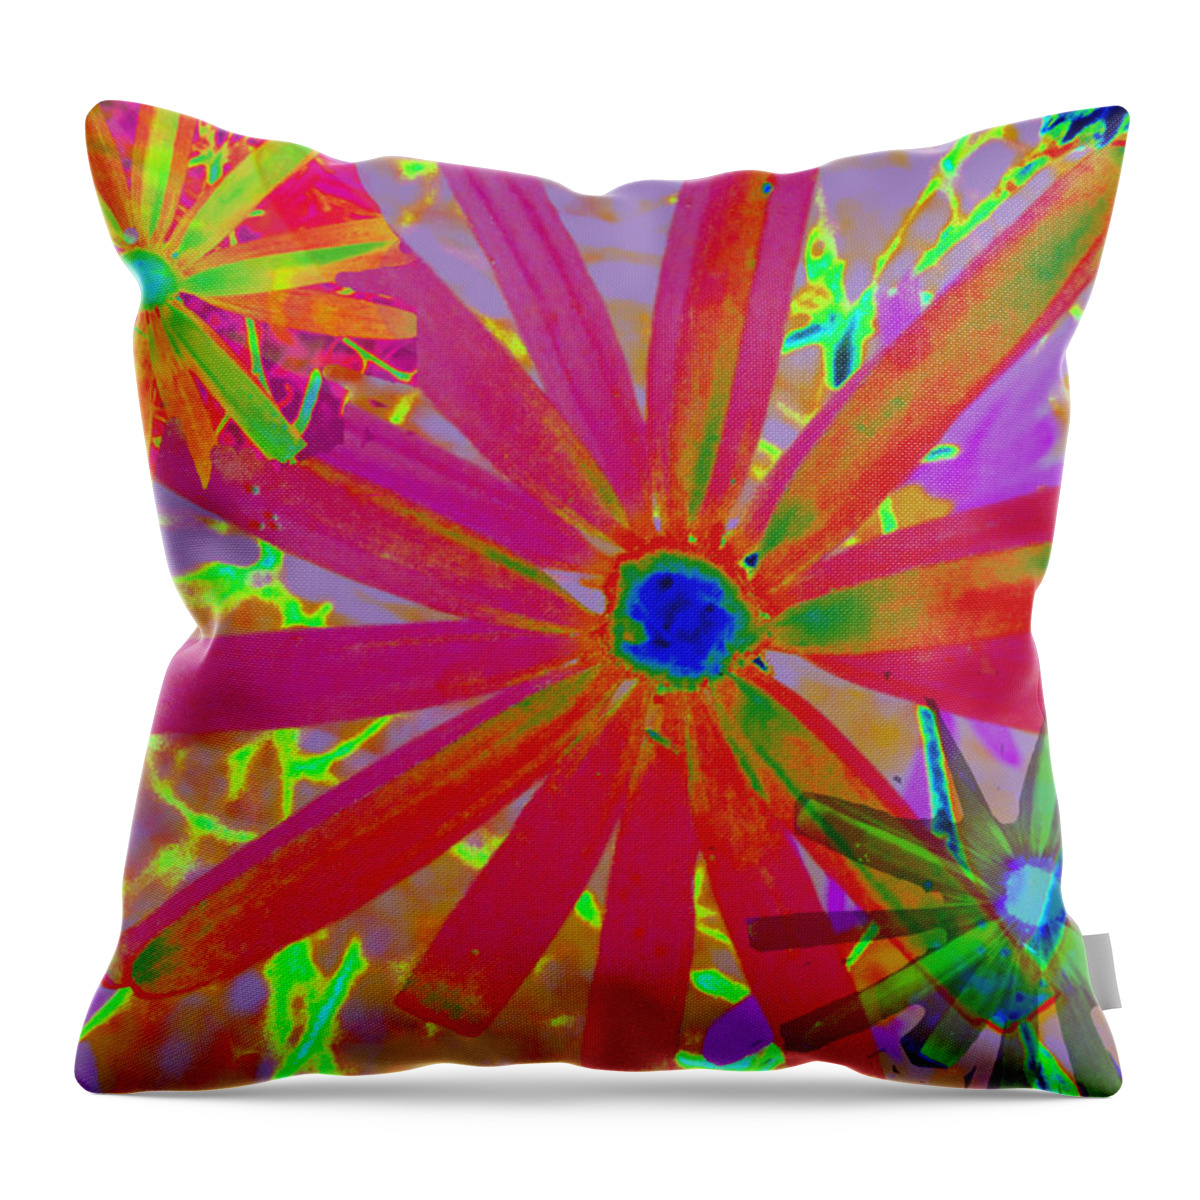 Wallpaper Throw Pillow featuring the photograph Bright Flowers Wallpaper by Charlotte Schafer